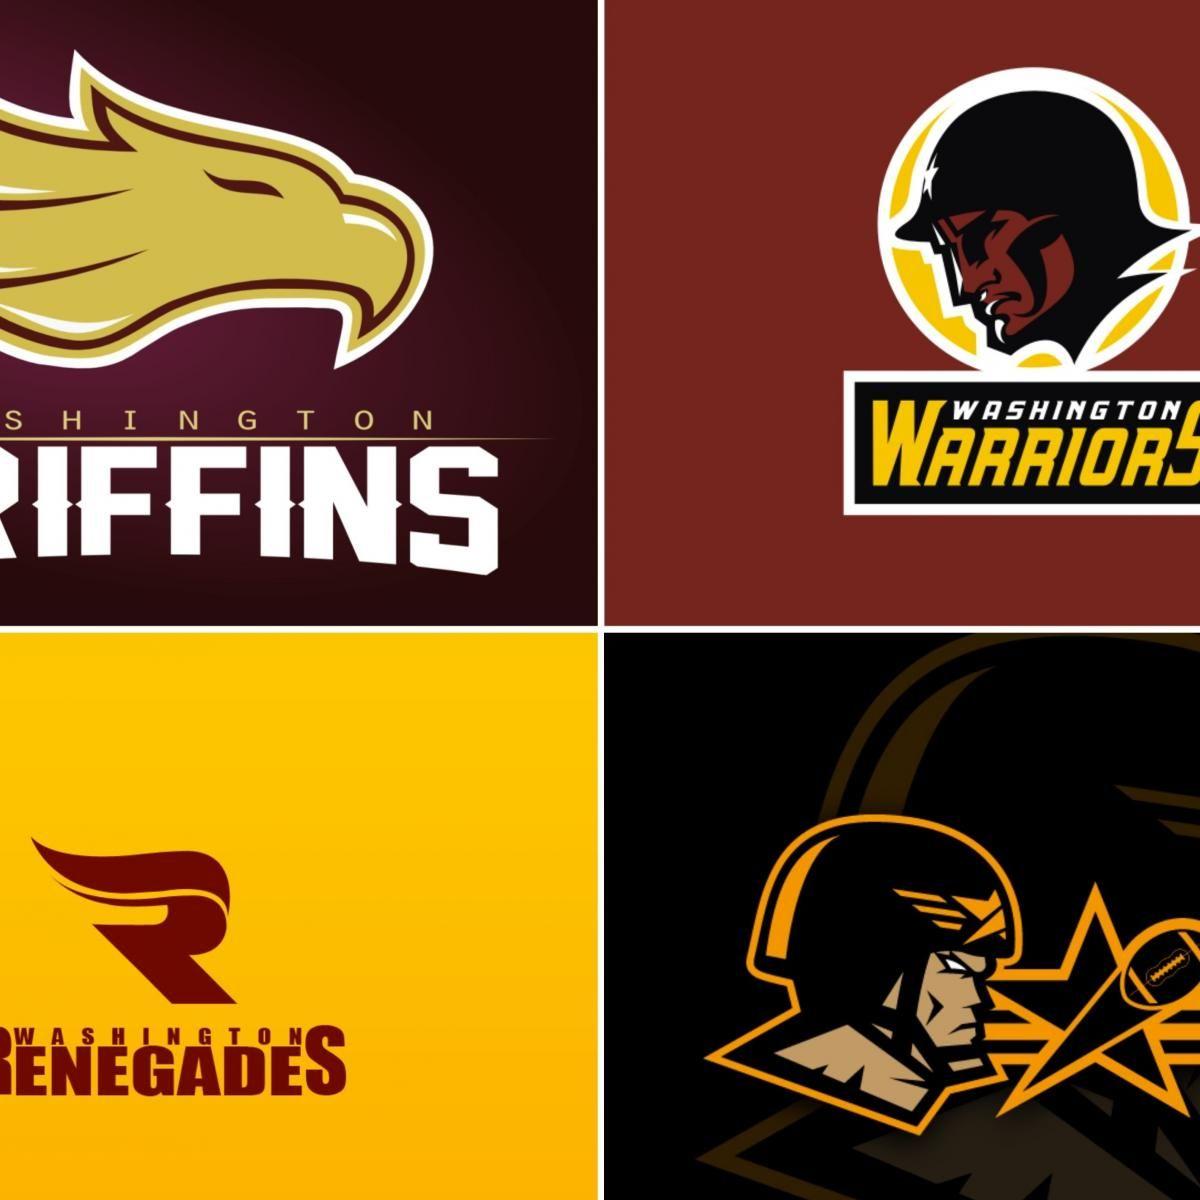 Redskins W Logo - Artists Come Up with New Names and Creative Logos for Washington